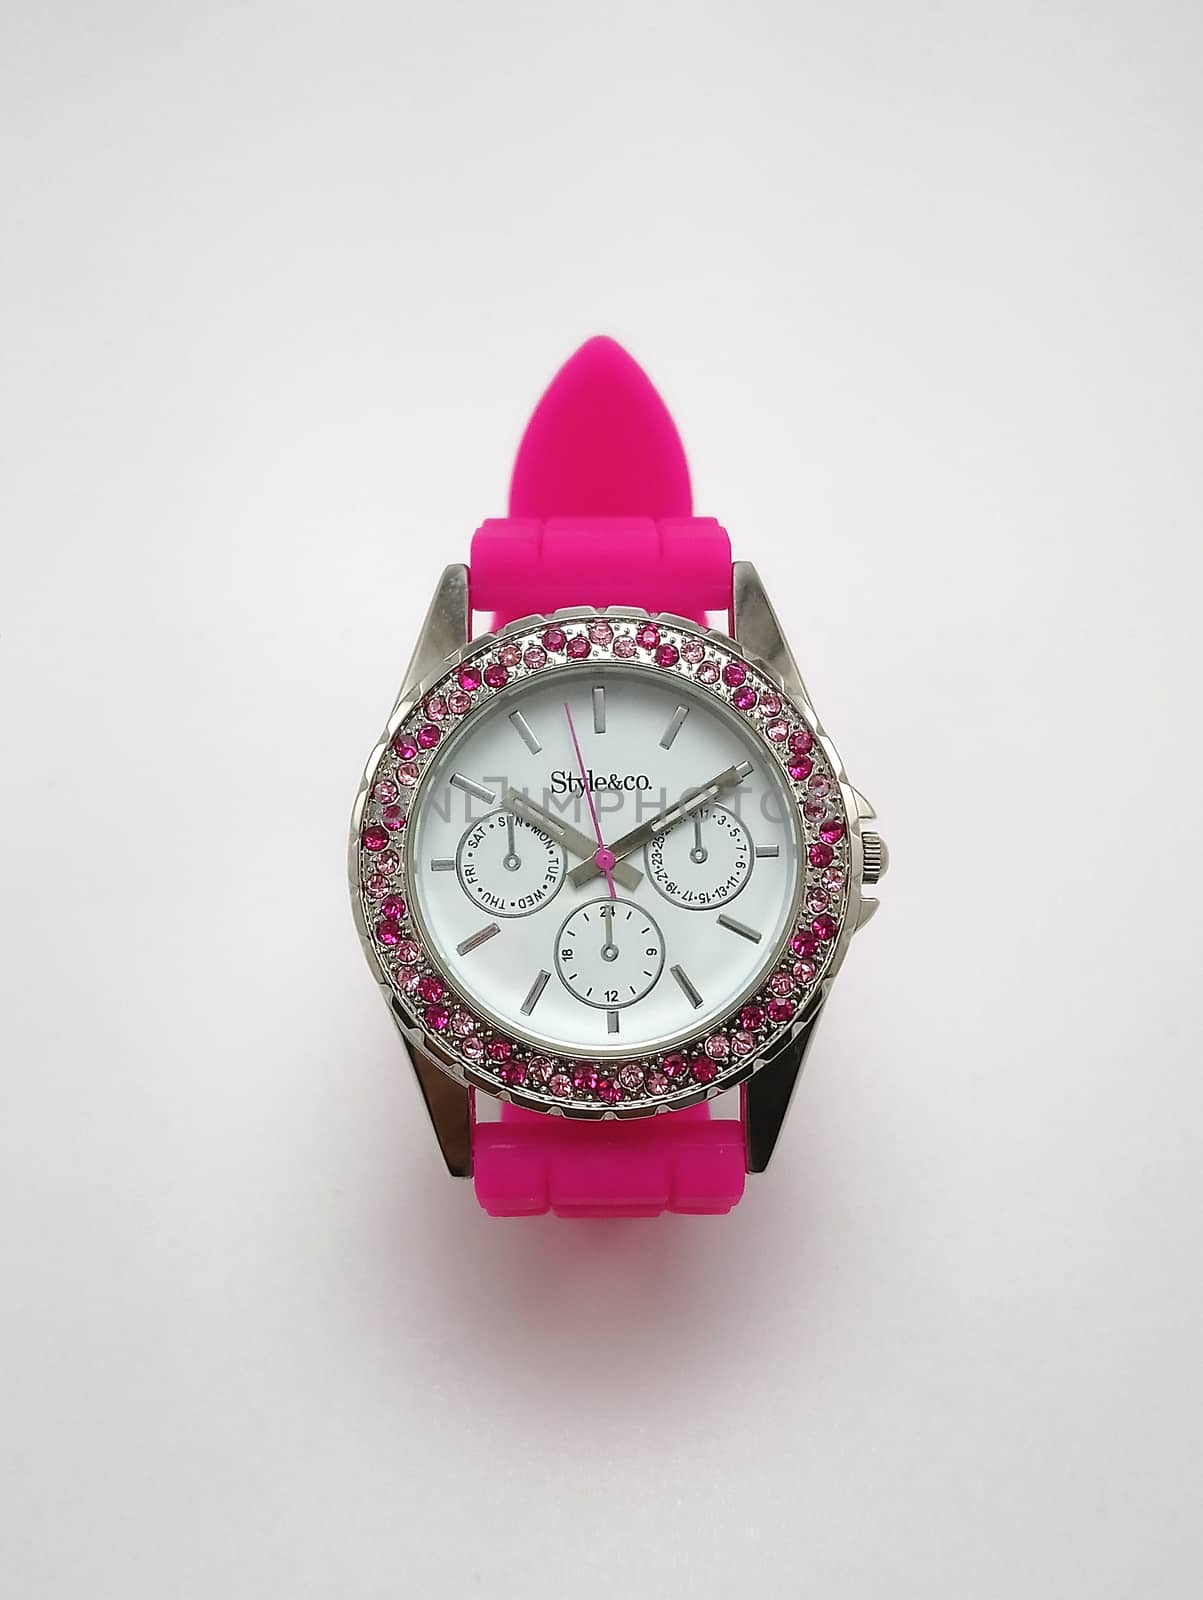 Style and co pink ladies wrist watch in Manila, Philippines by imwaltersy